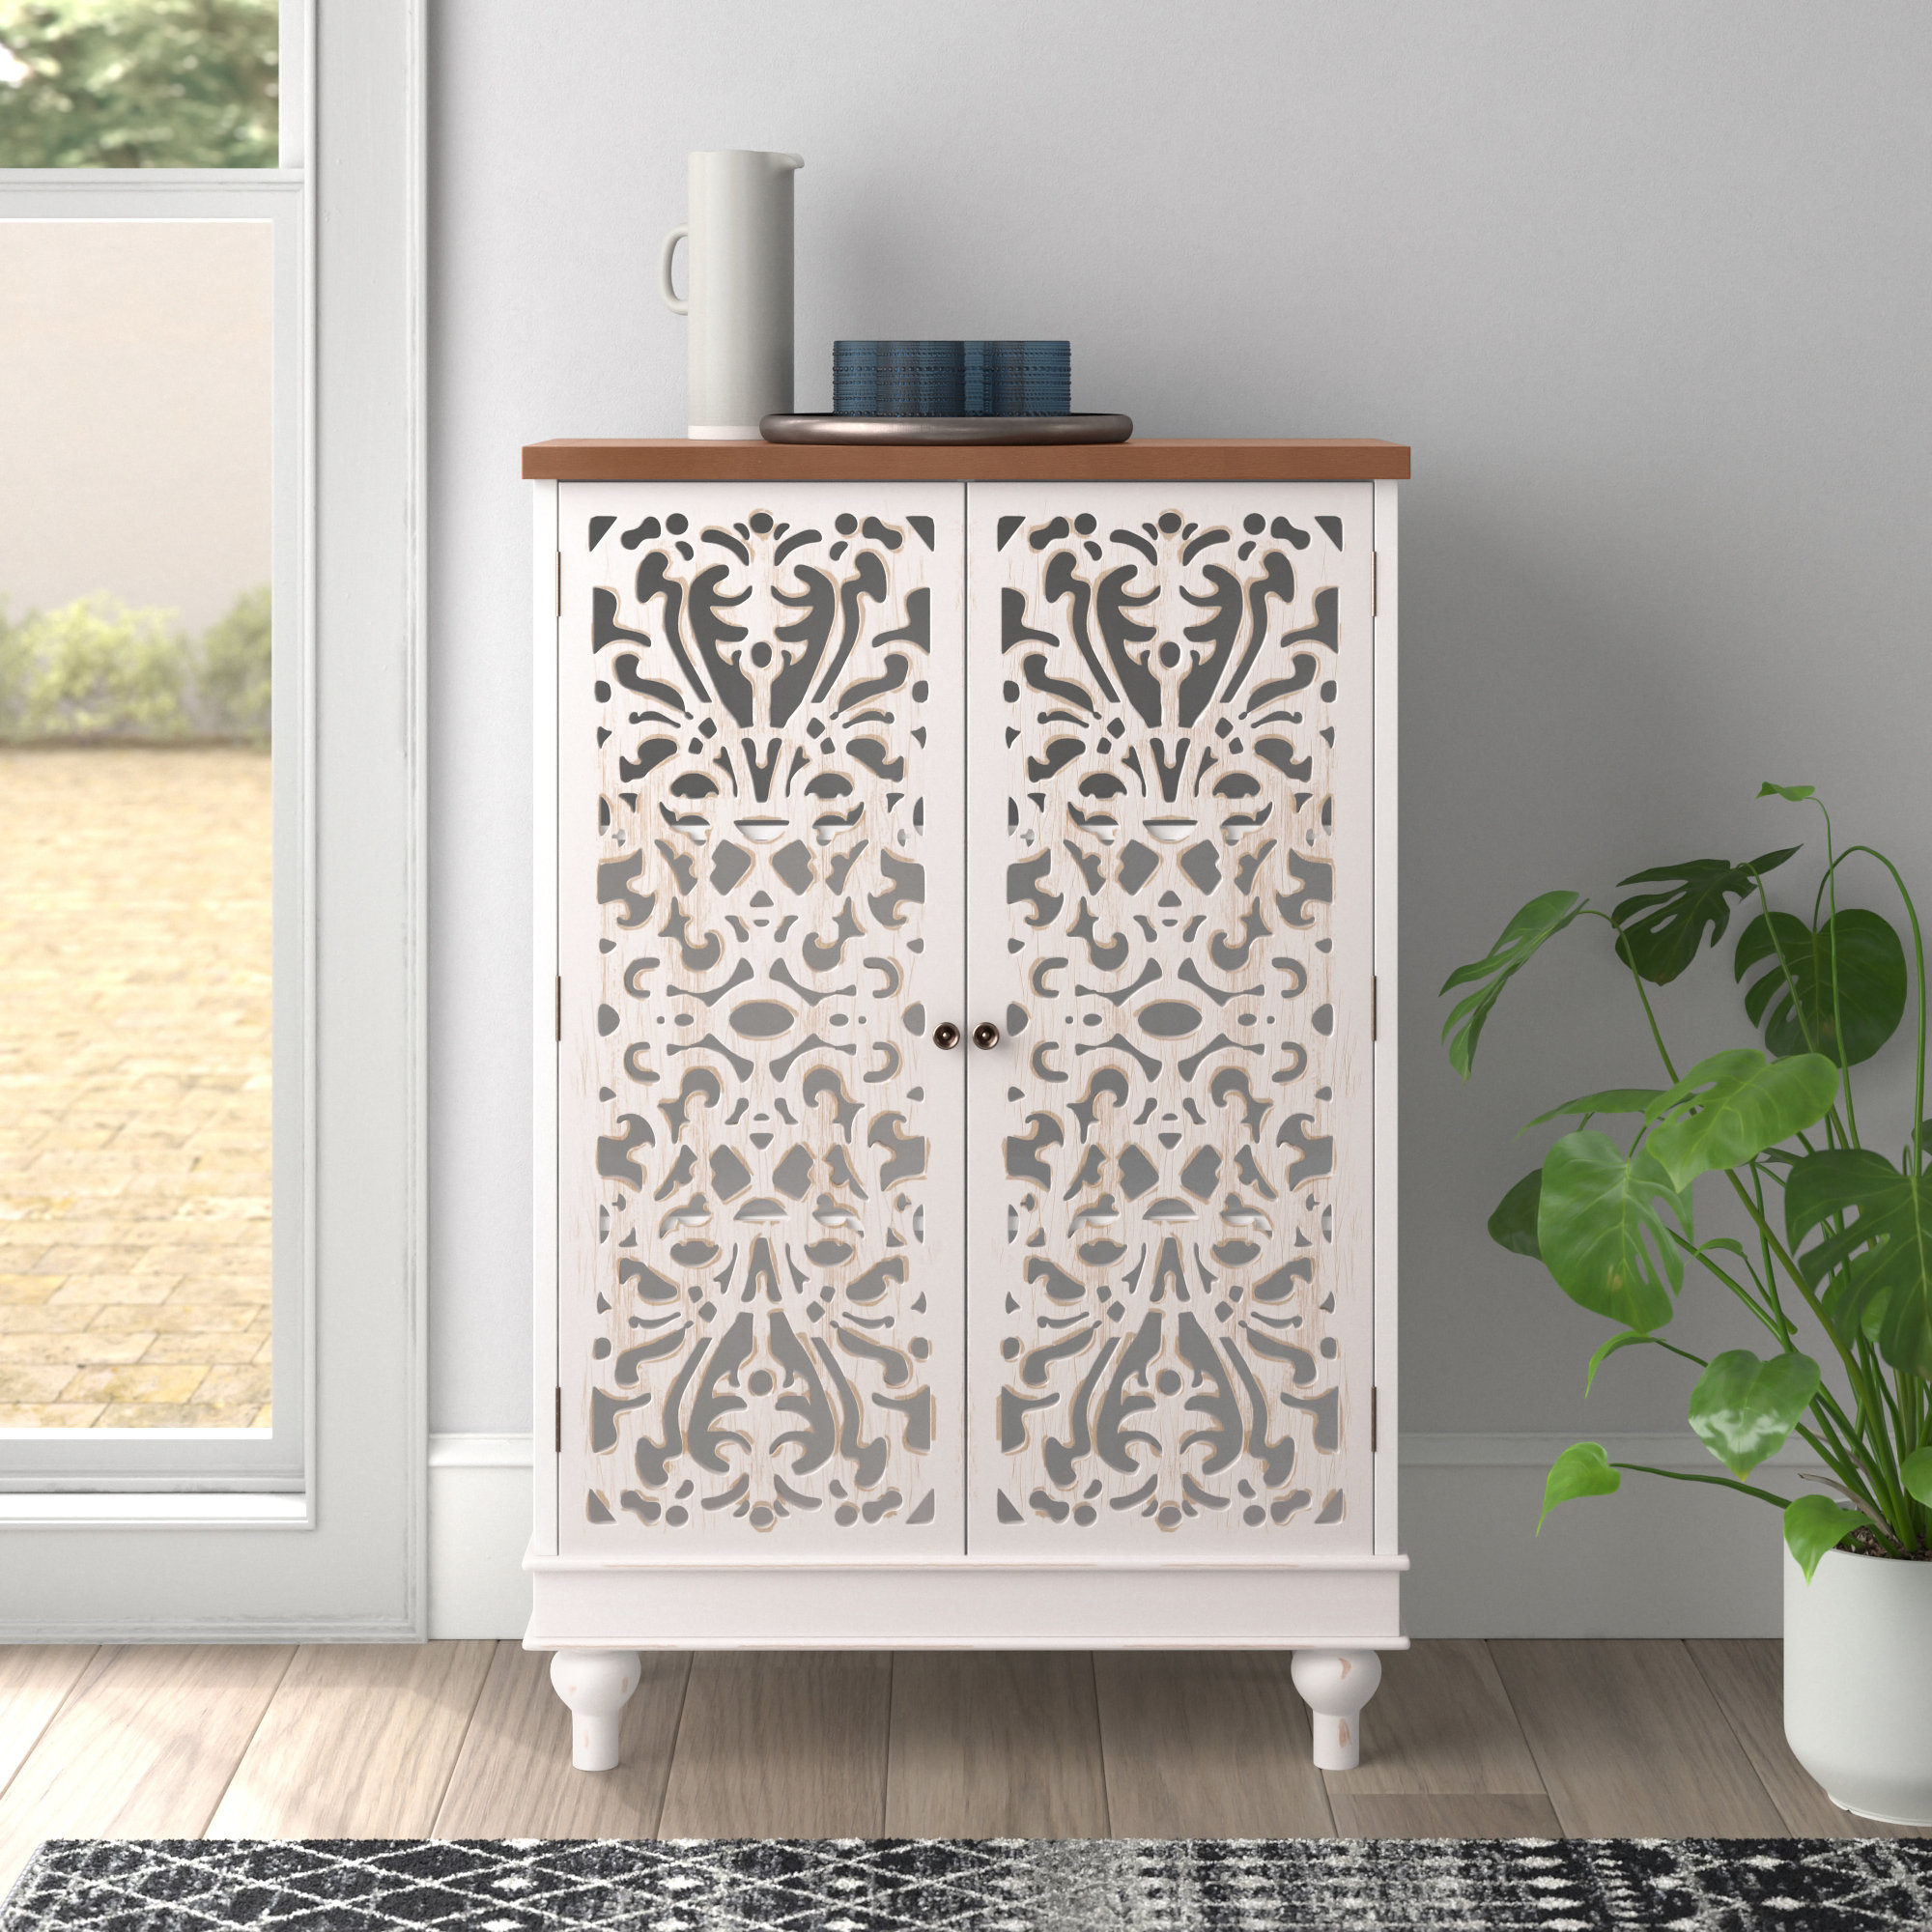 Pacific Stackable Sliding Glass Doors Cabinet Antique White